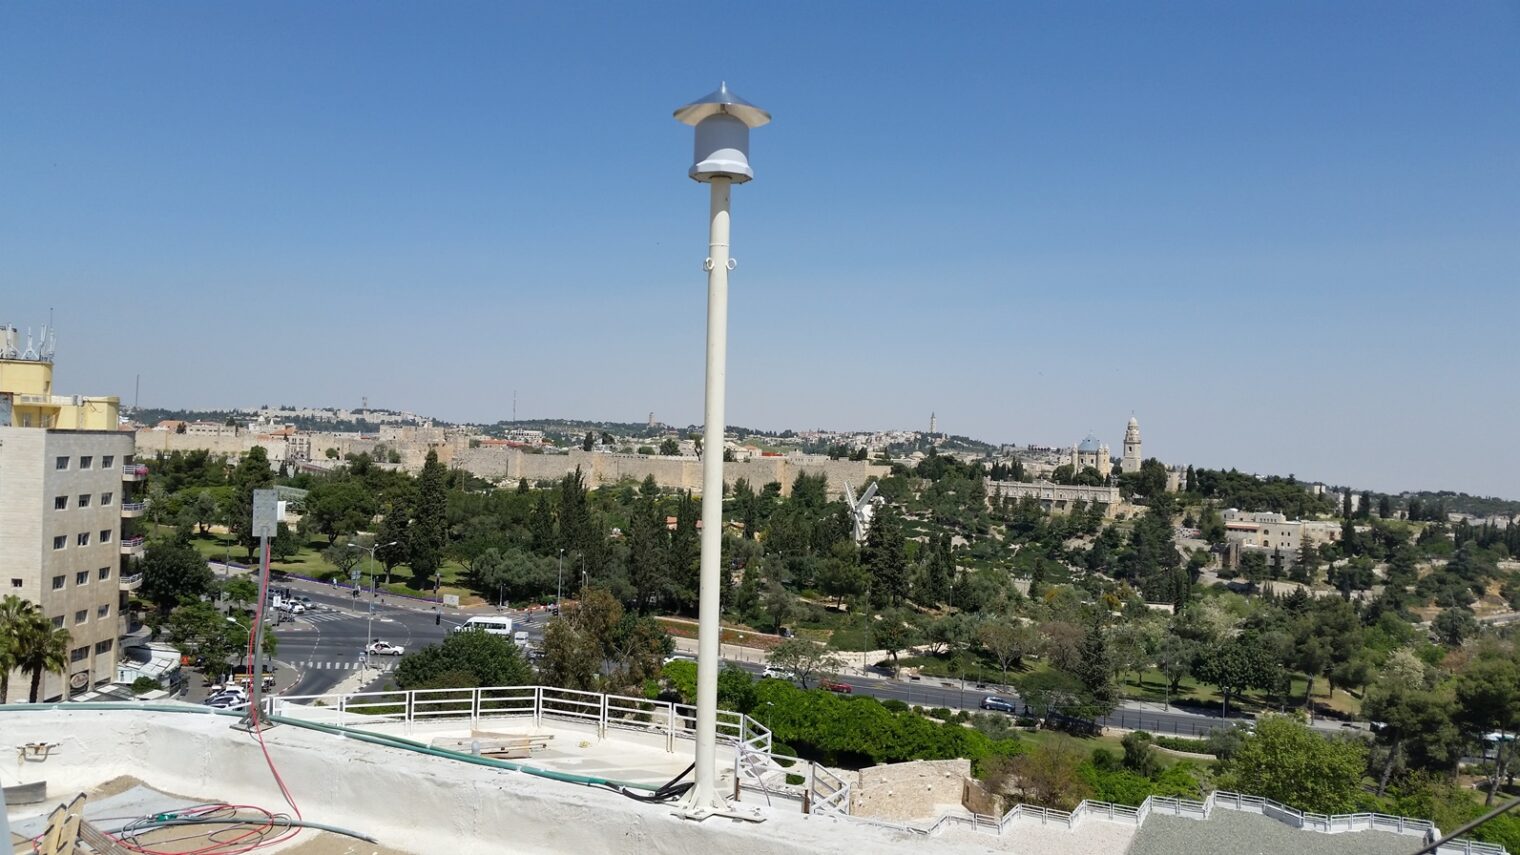 Looking out over Jerusalem’s Old City from the roof of the Inbal Jerusalem Hotel. Photo by Danny Seaman